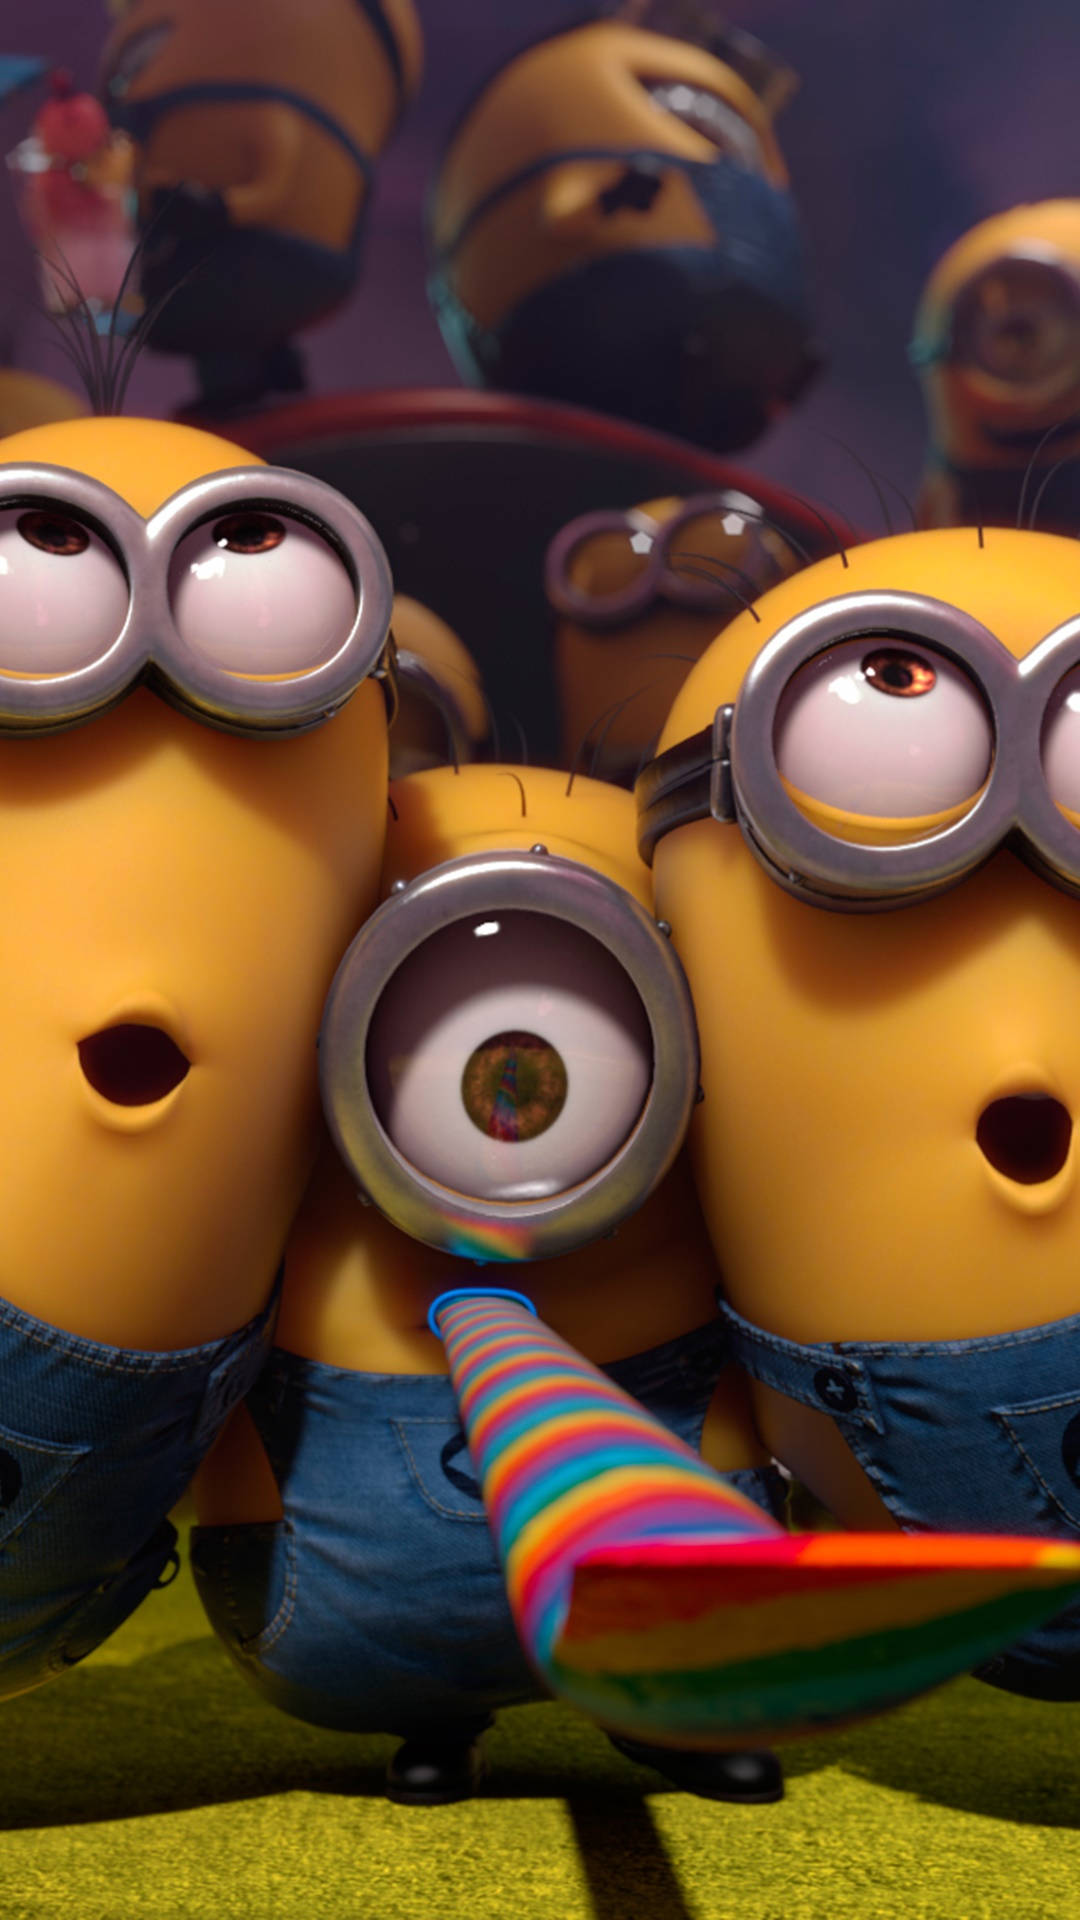 Three Party Minions Despicable Me 2 Wallpaper